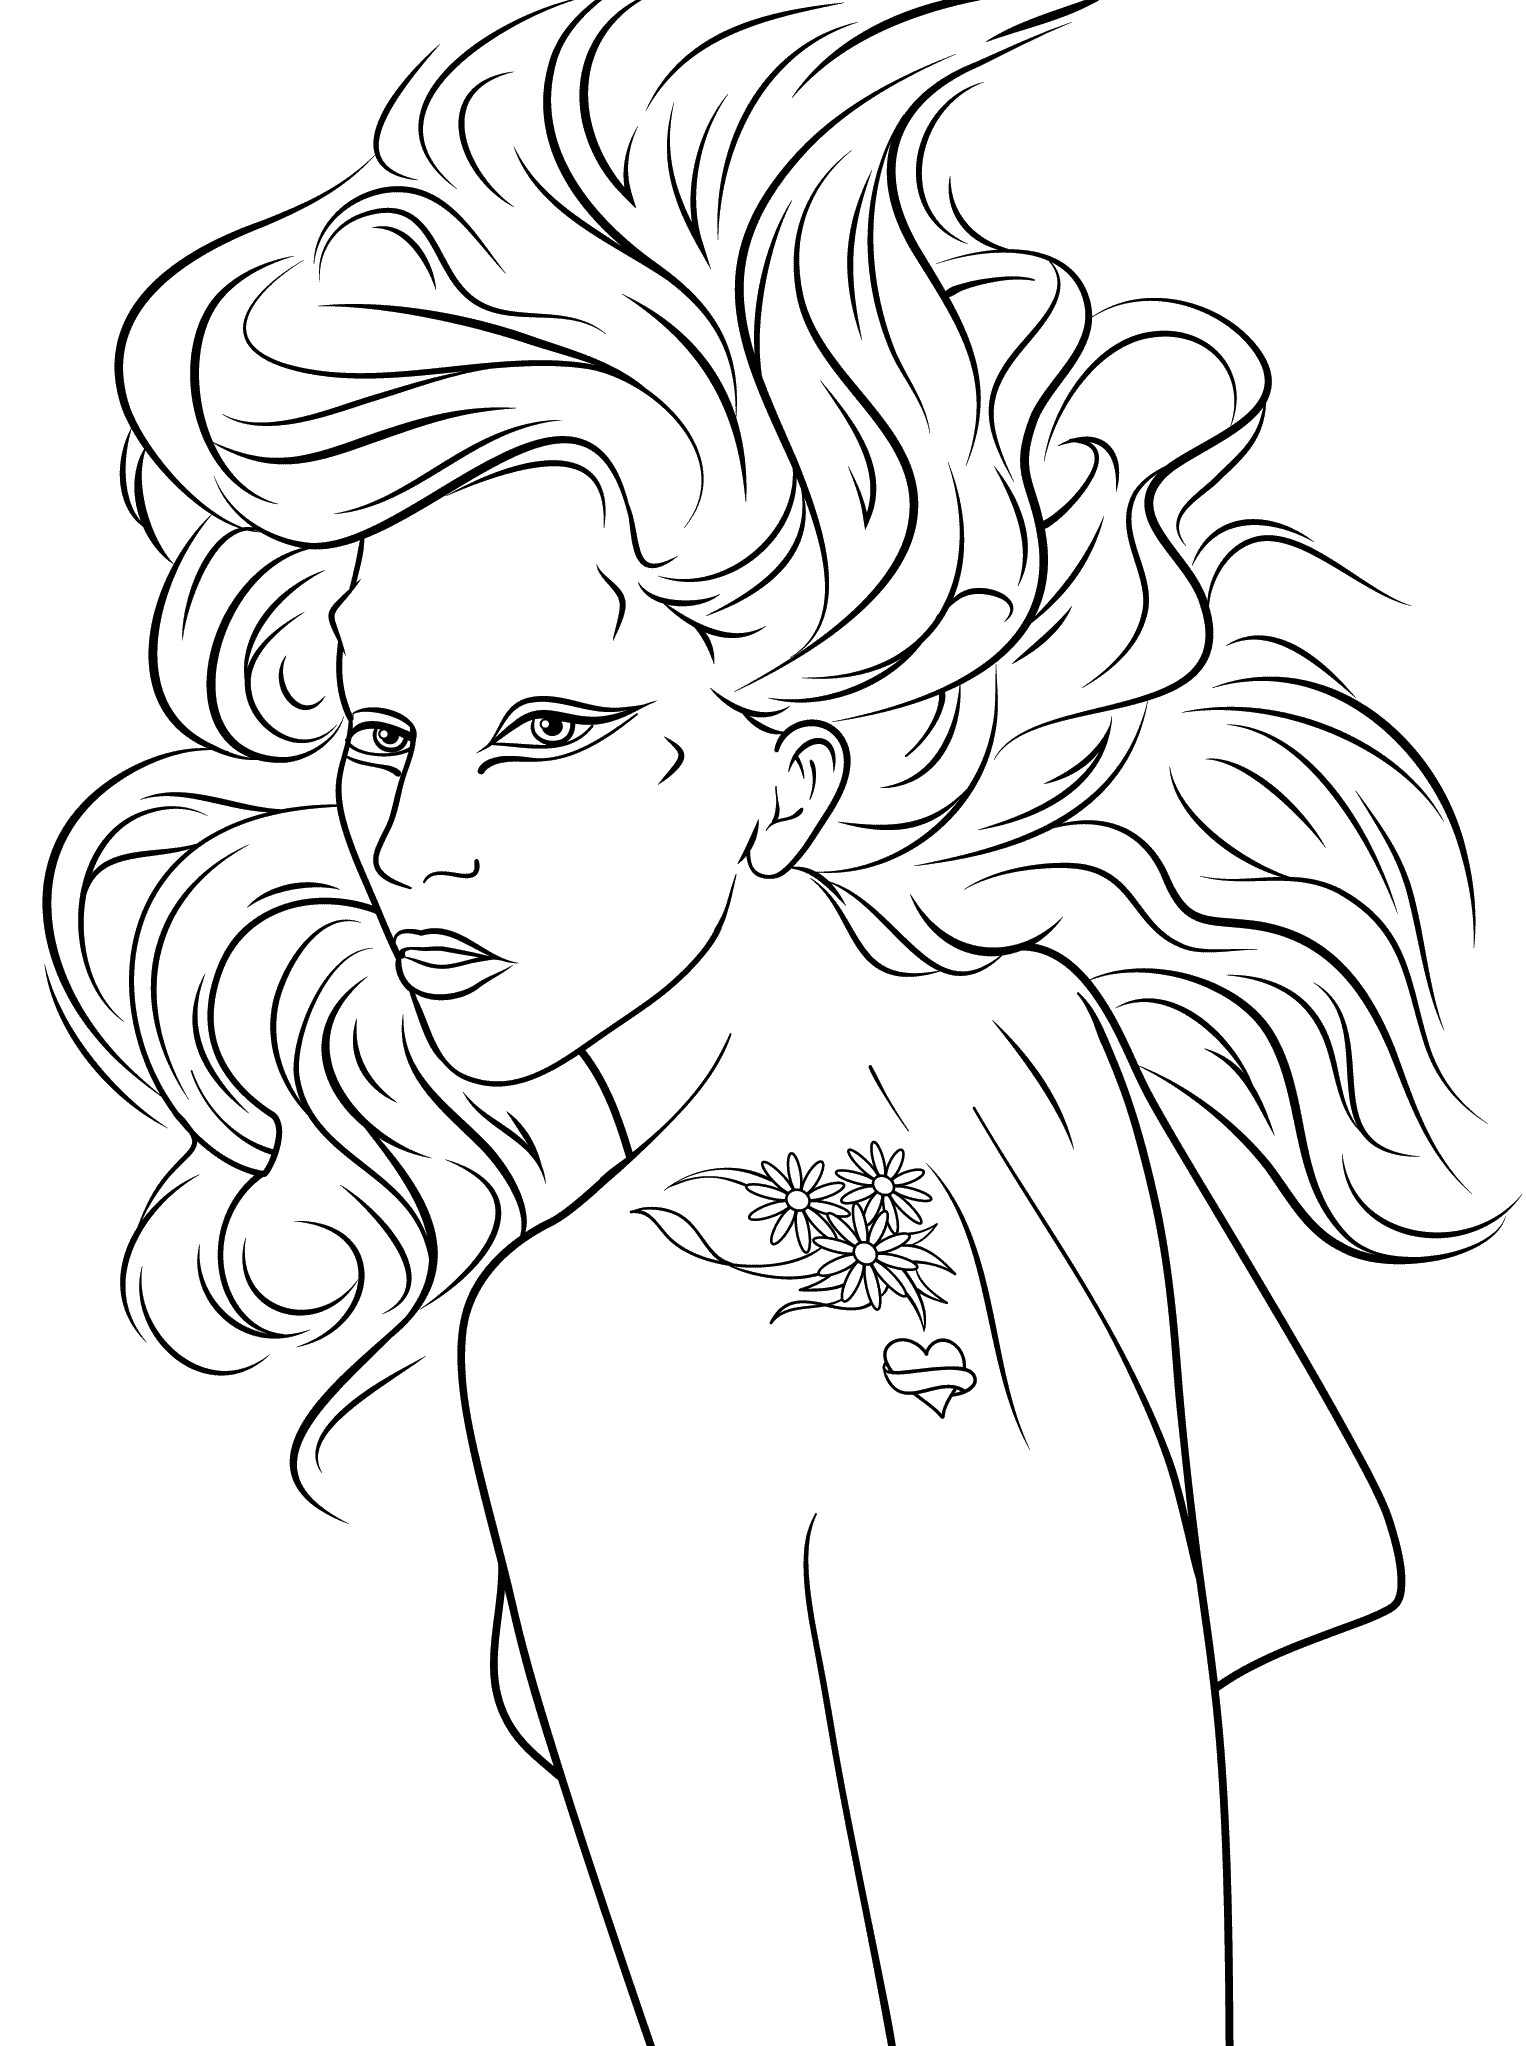 Lady Gaga Celebrity Coloring Page